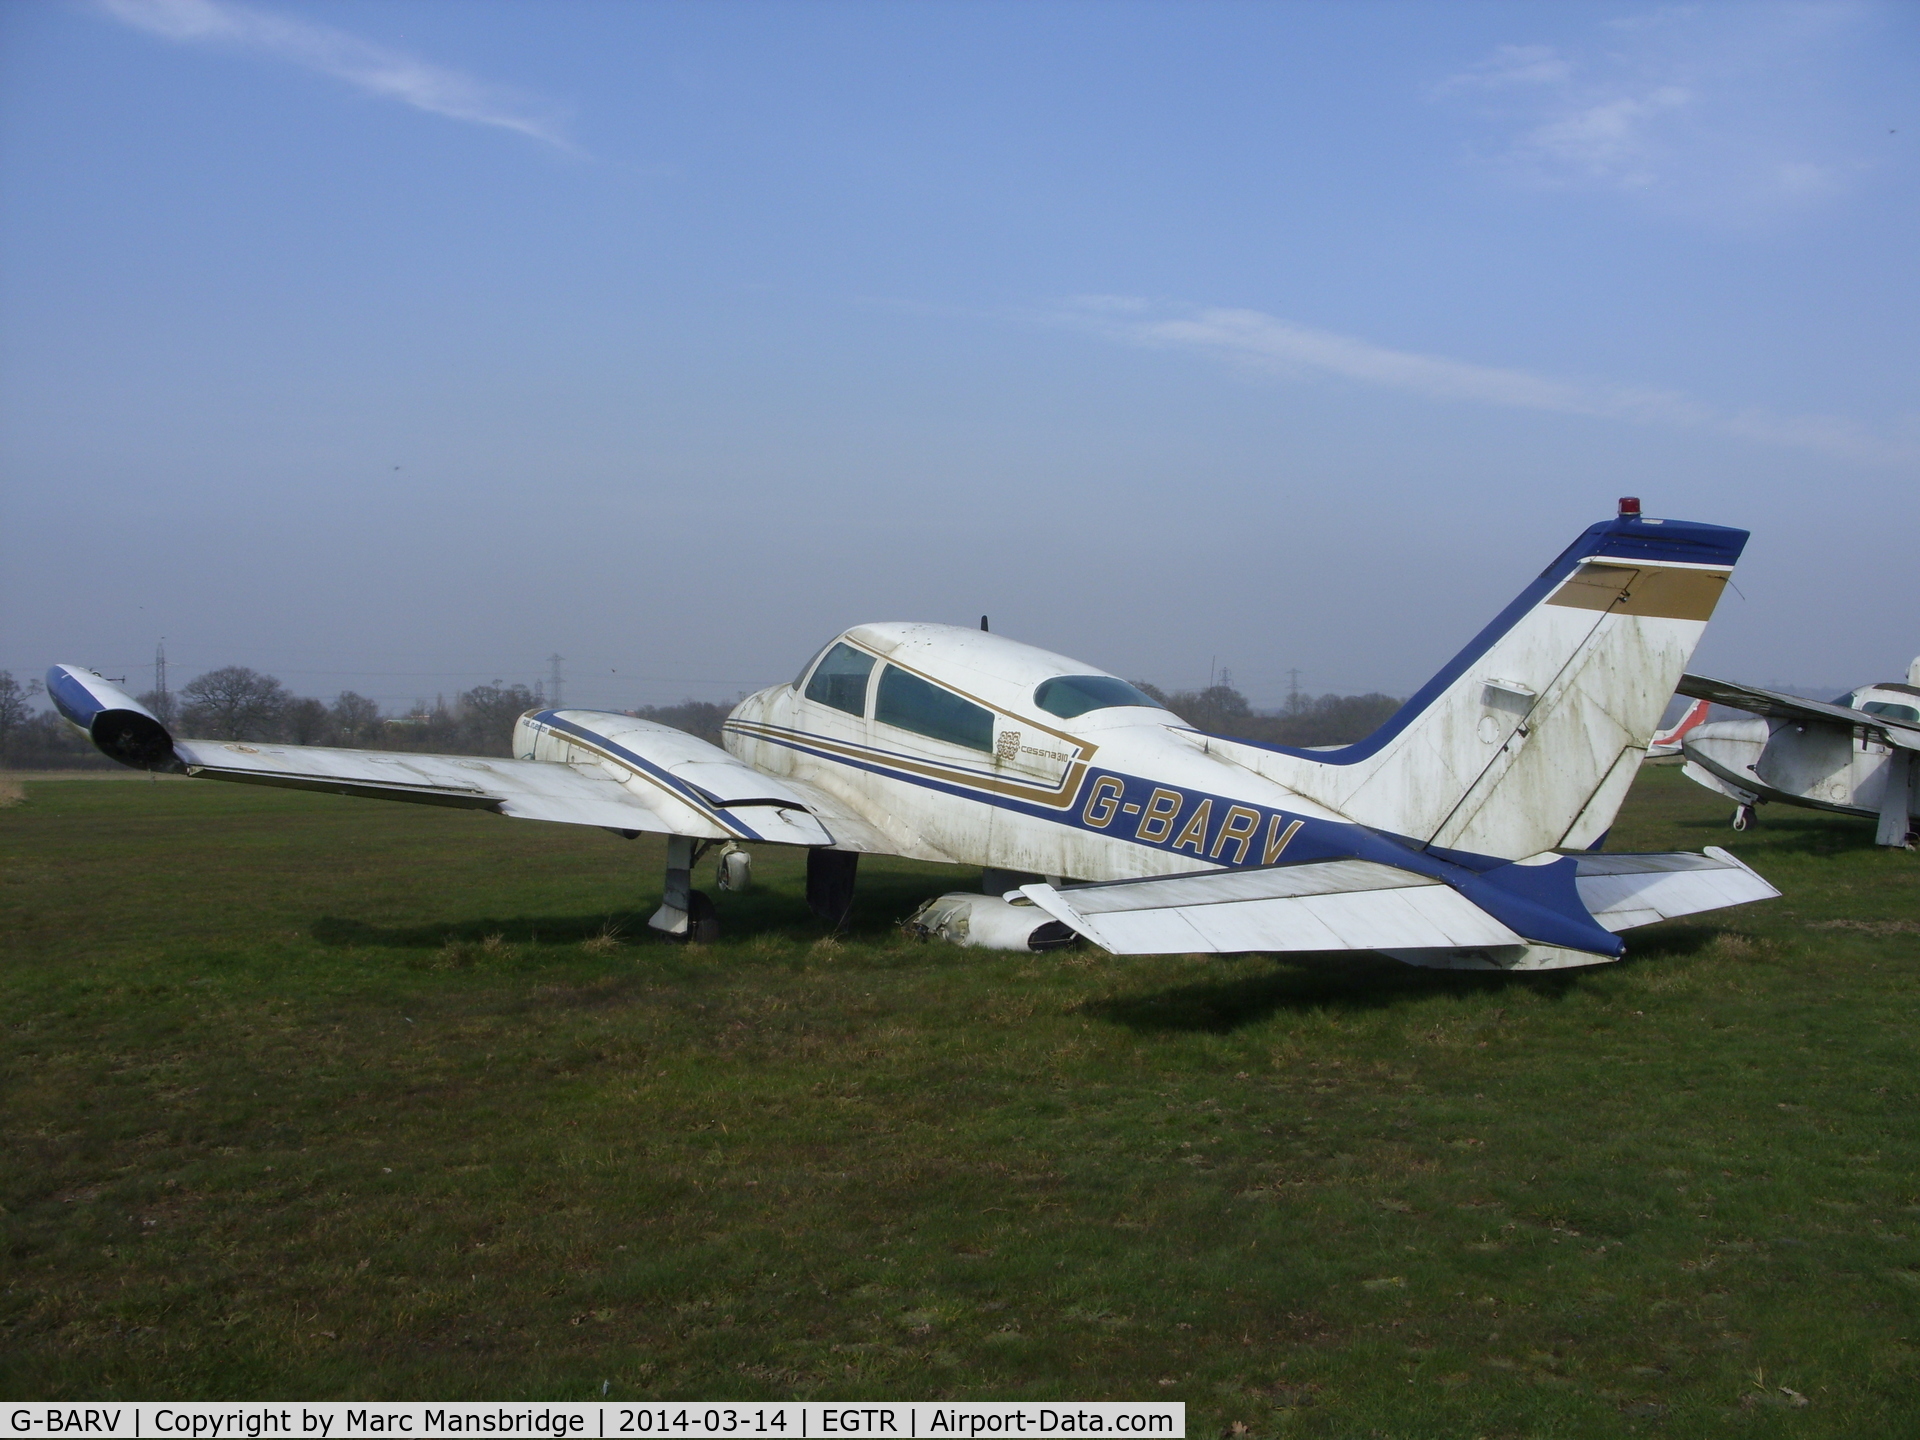 G-BARV, 1973 Cessna 310Q C/N 310Q-0774, Another aircraft just left to rot on the edge of Elstree airfield EGTR